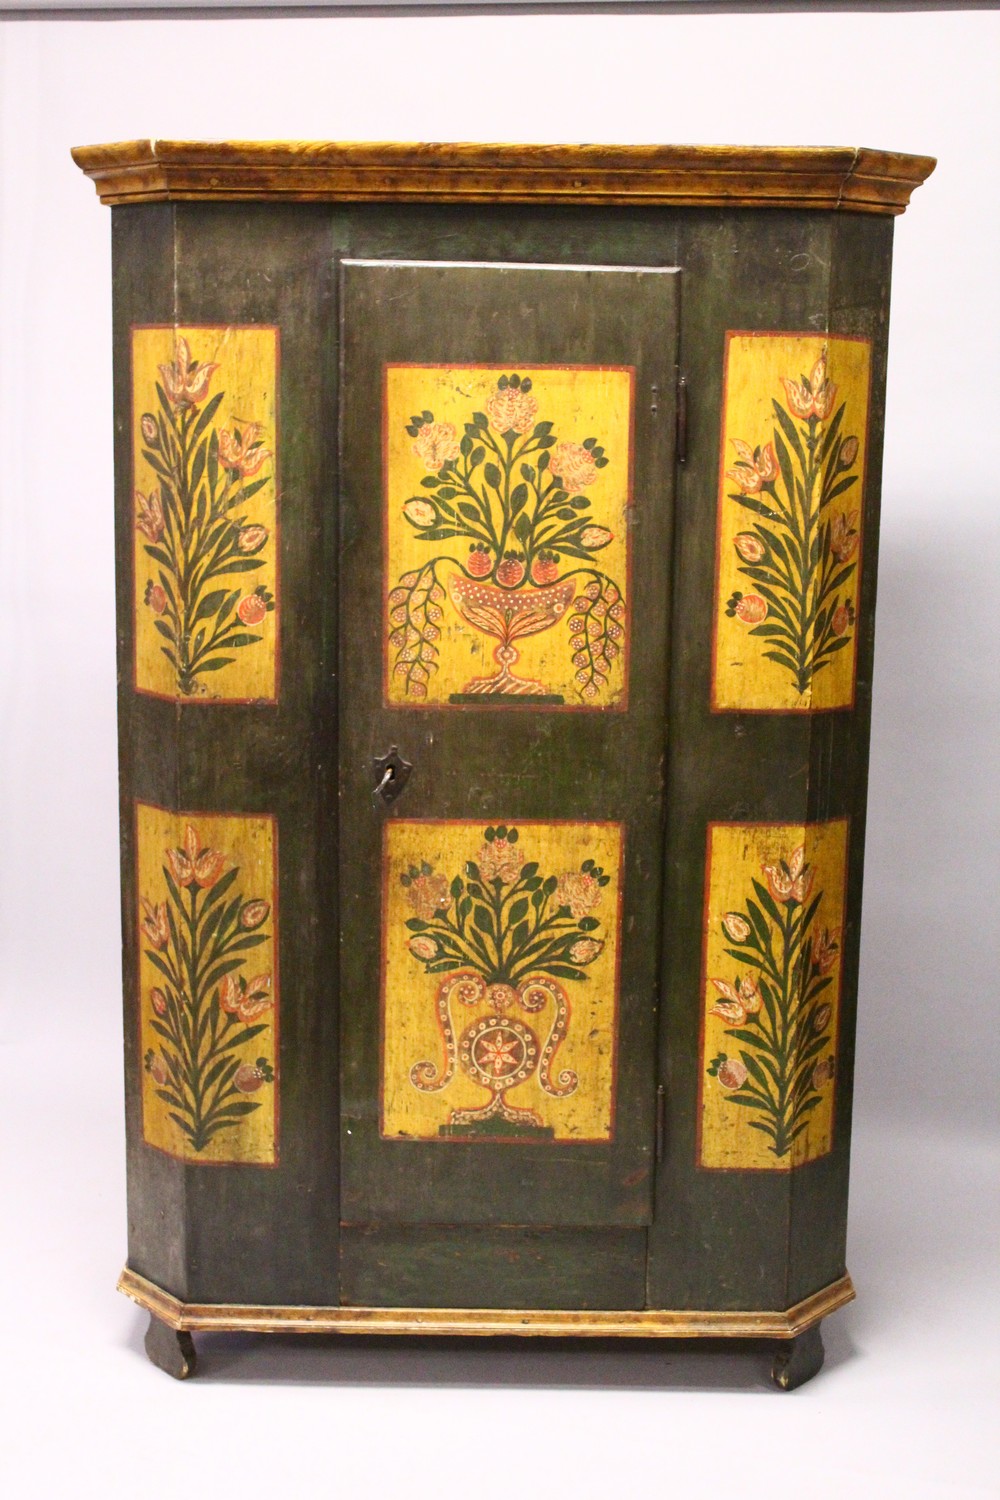 AN 18TH/19TH CENTURY AUSTRIAN PAINTED PINE CUPBOARD, with a single door, canted sides, all painted - Image 3 of 10